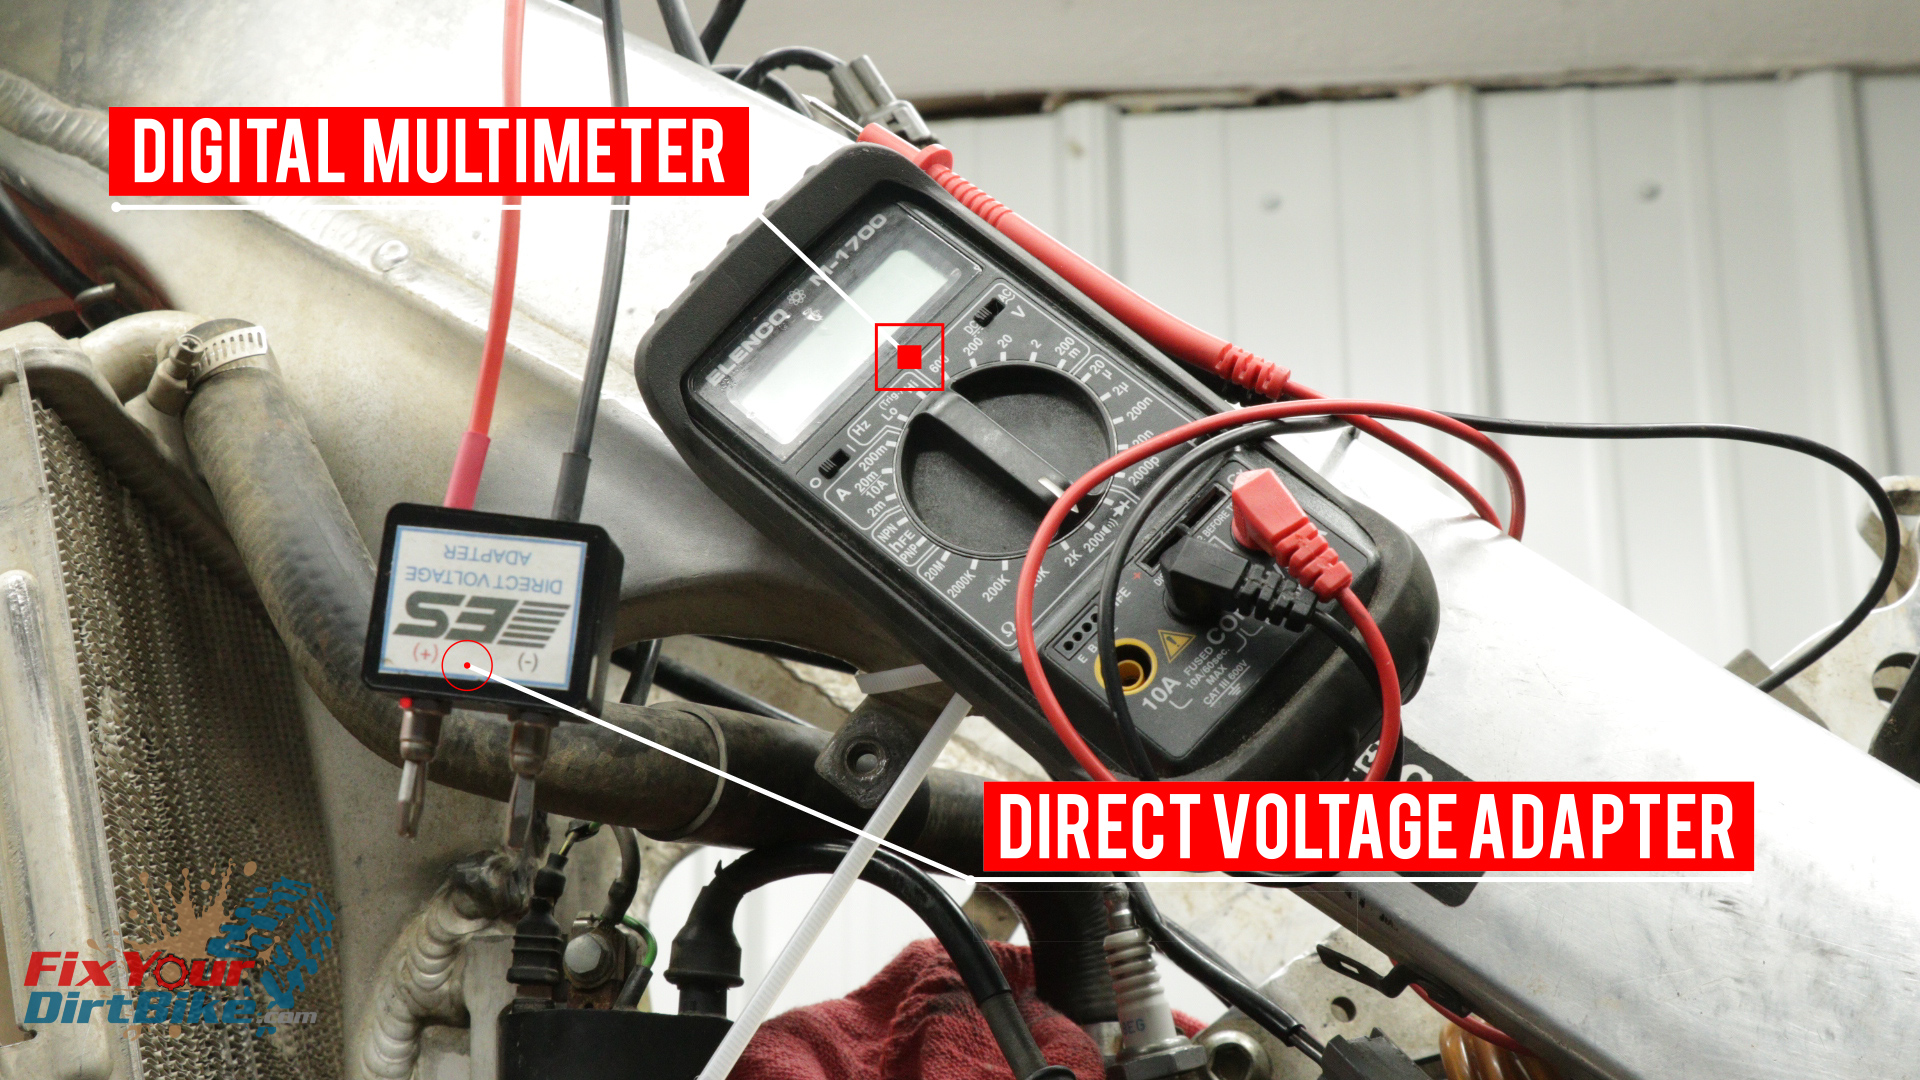 You Will Need A Multimeter And Direct Voltage Adapter